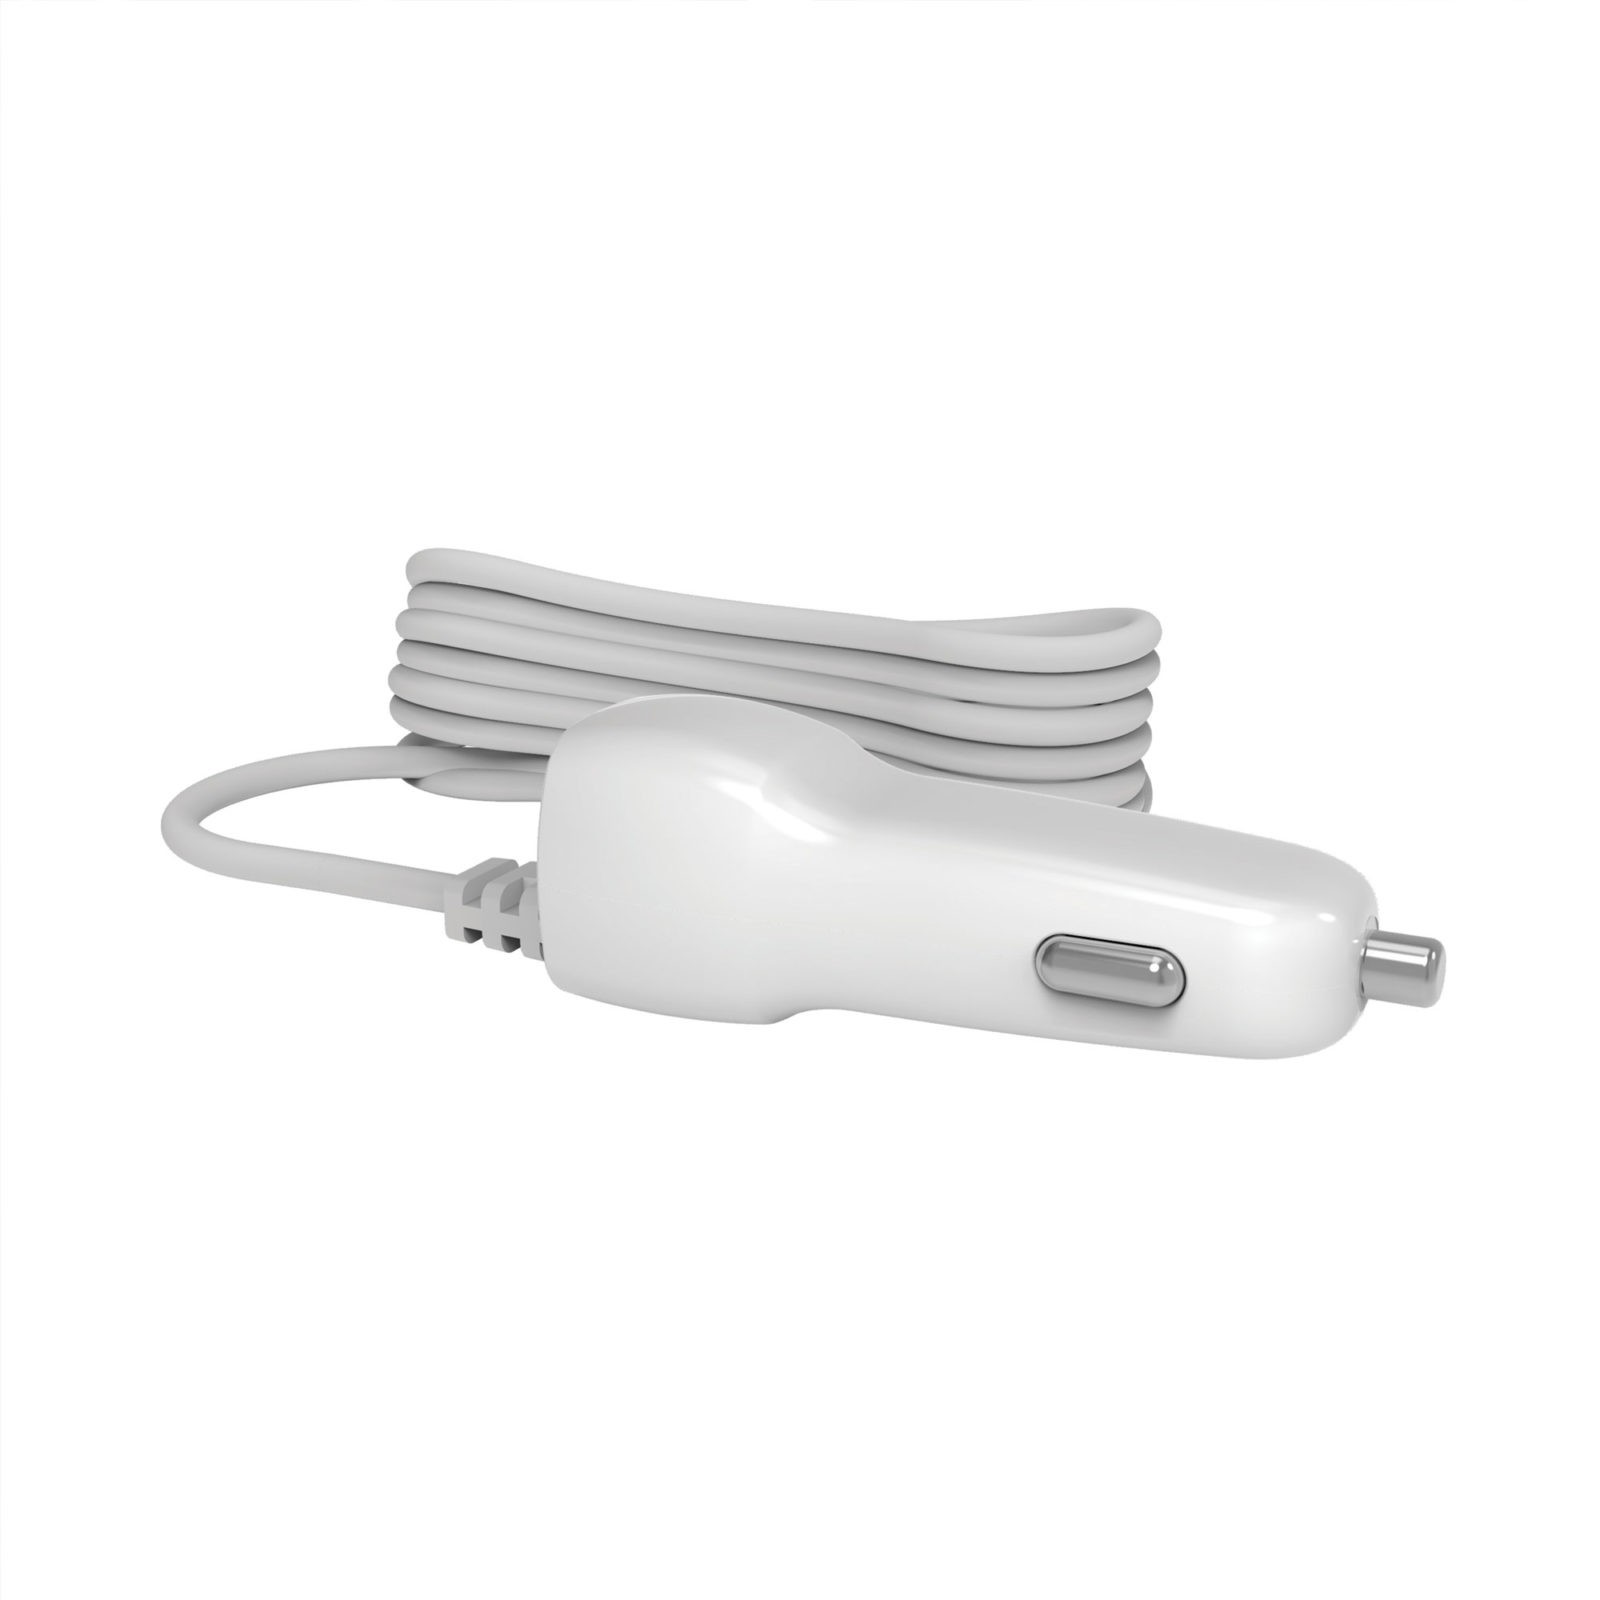 https://www.drbrownsbaby.com/wp-content/uploads/2021/09/BF112_Product_Auto_Adaptor_for_Electric_Breast_Pump_2000x2000.jpg